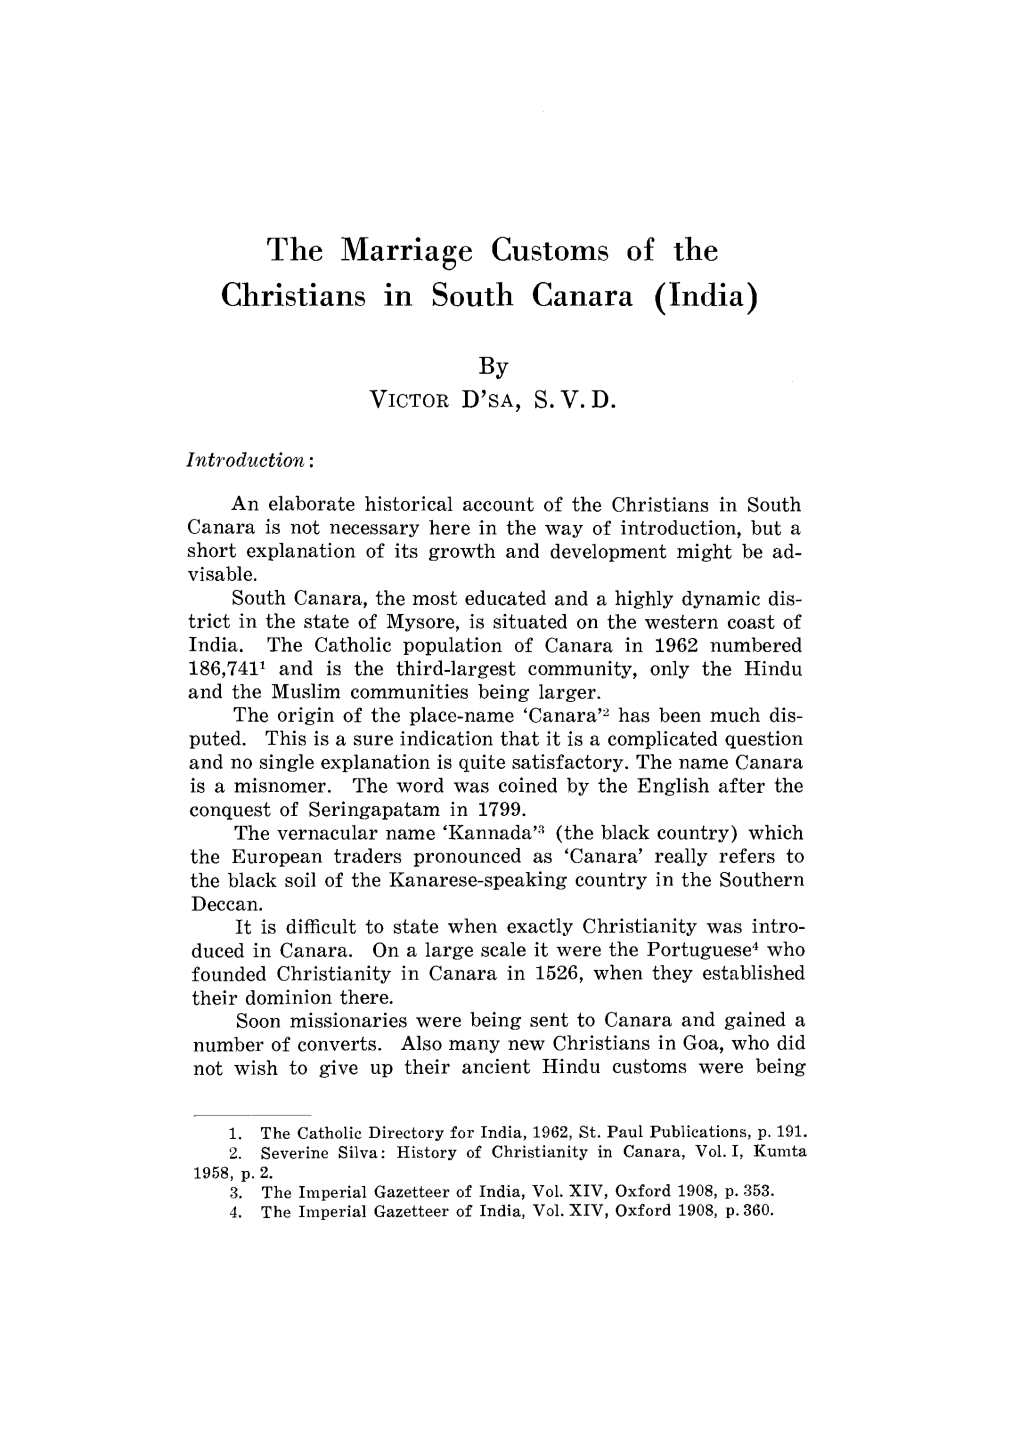 The Marriage Customs of the Christians in South Canara (India)